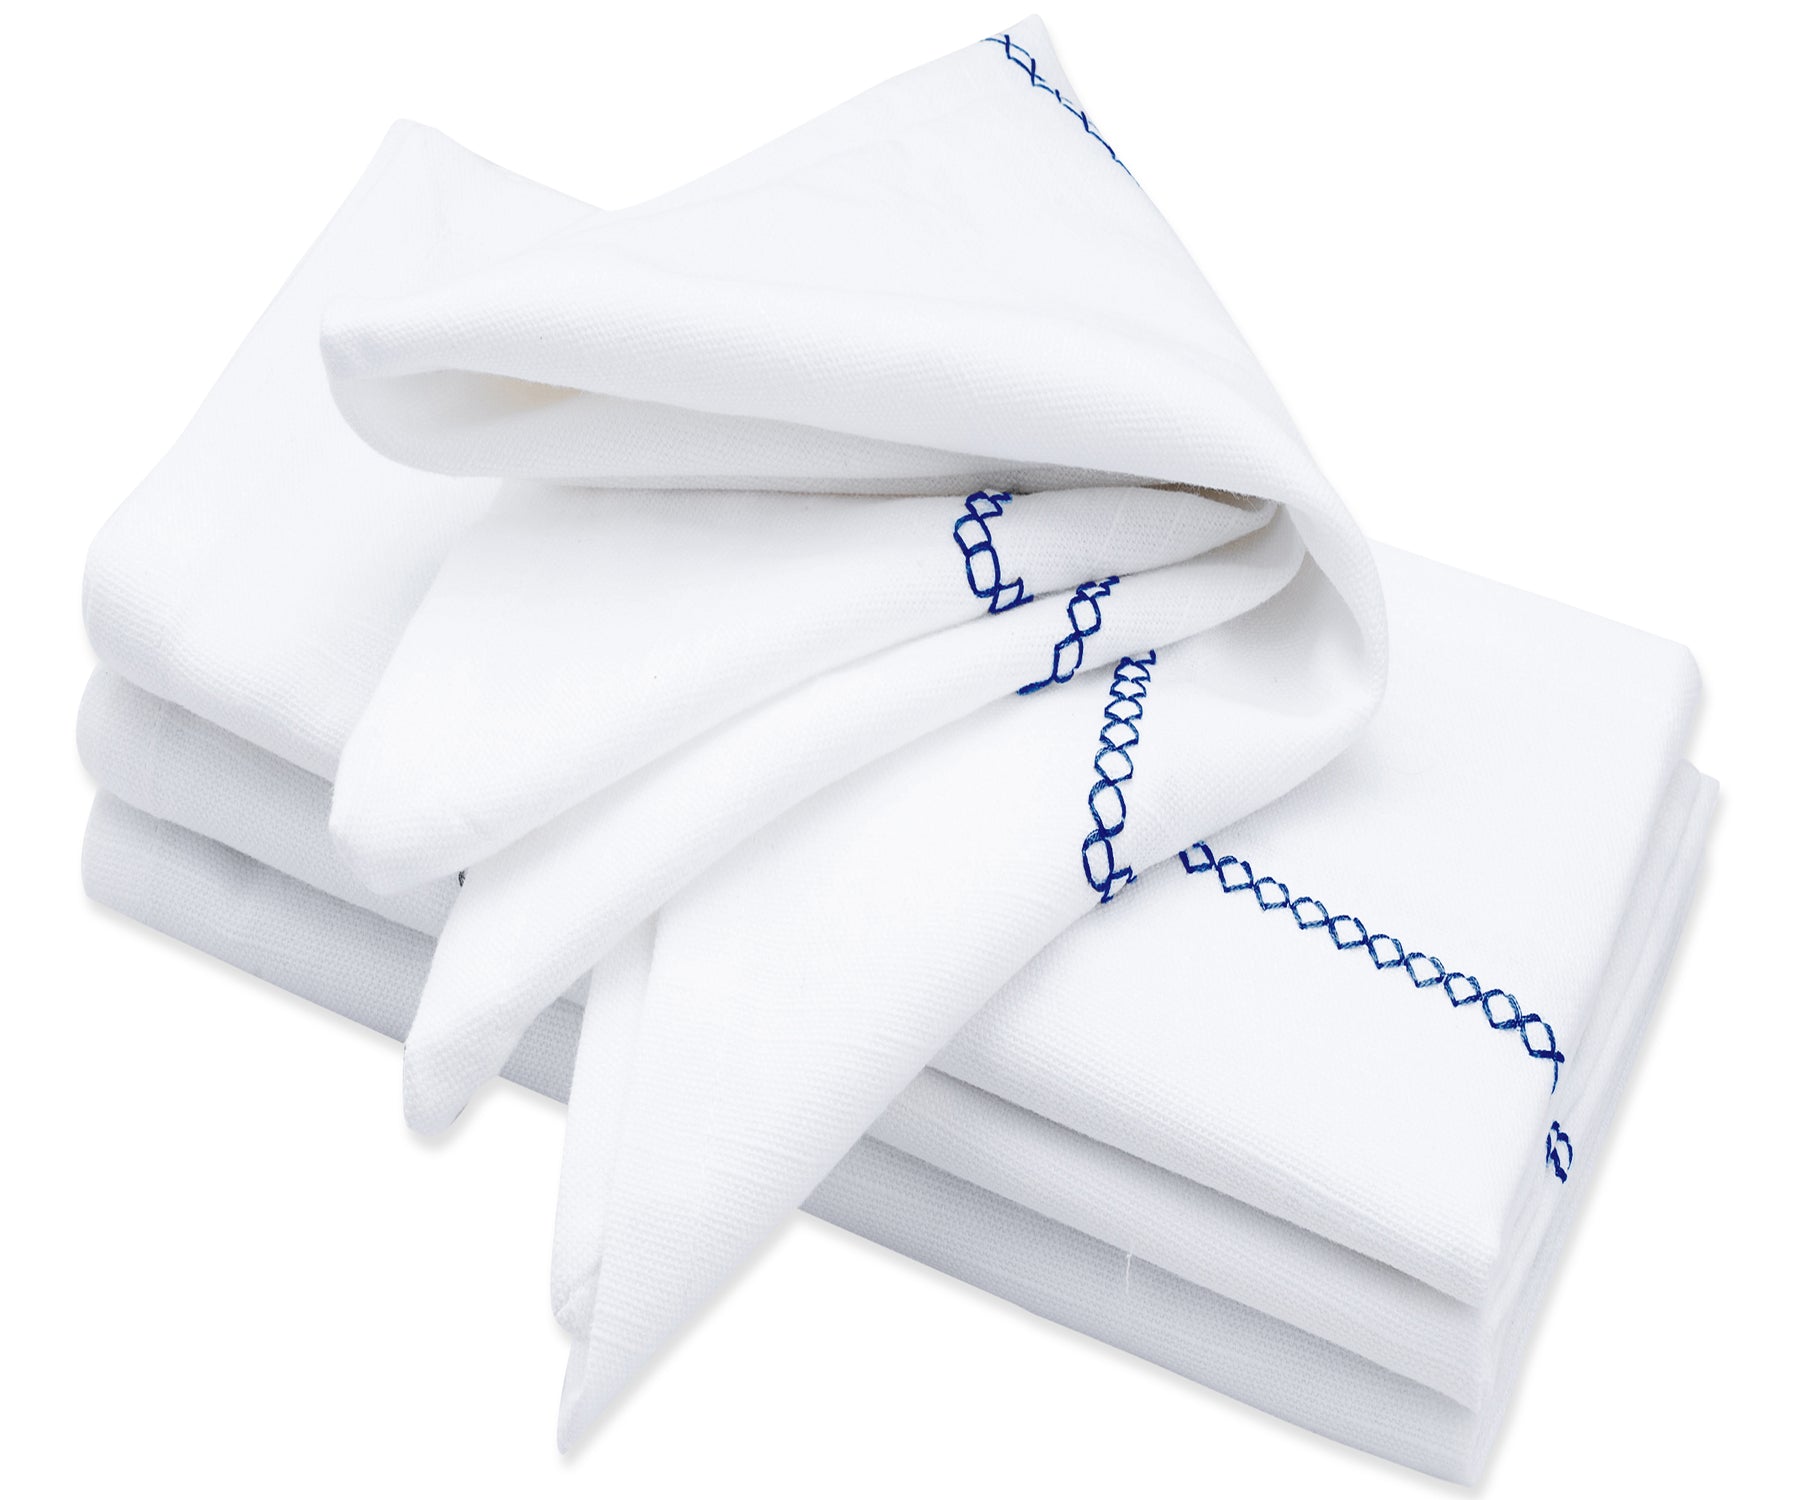 All Cotton and Llinen| Dinner Napkins |  Embroidered Napkins